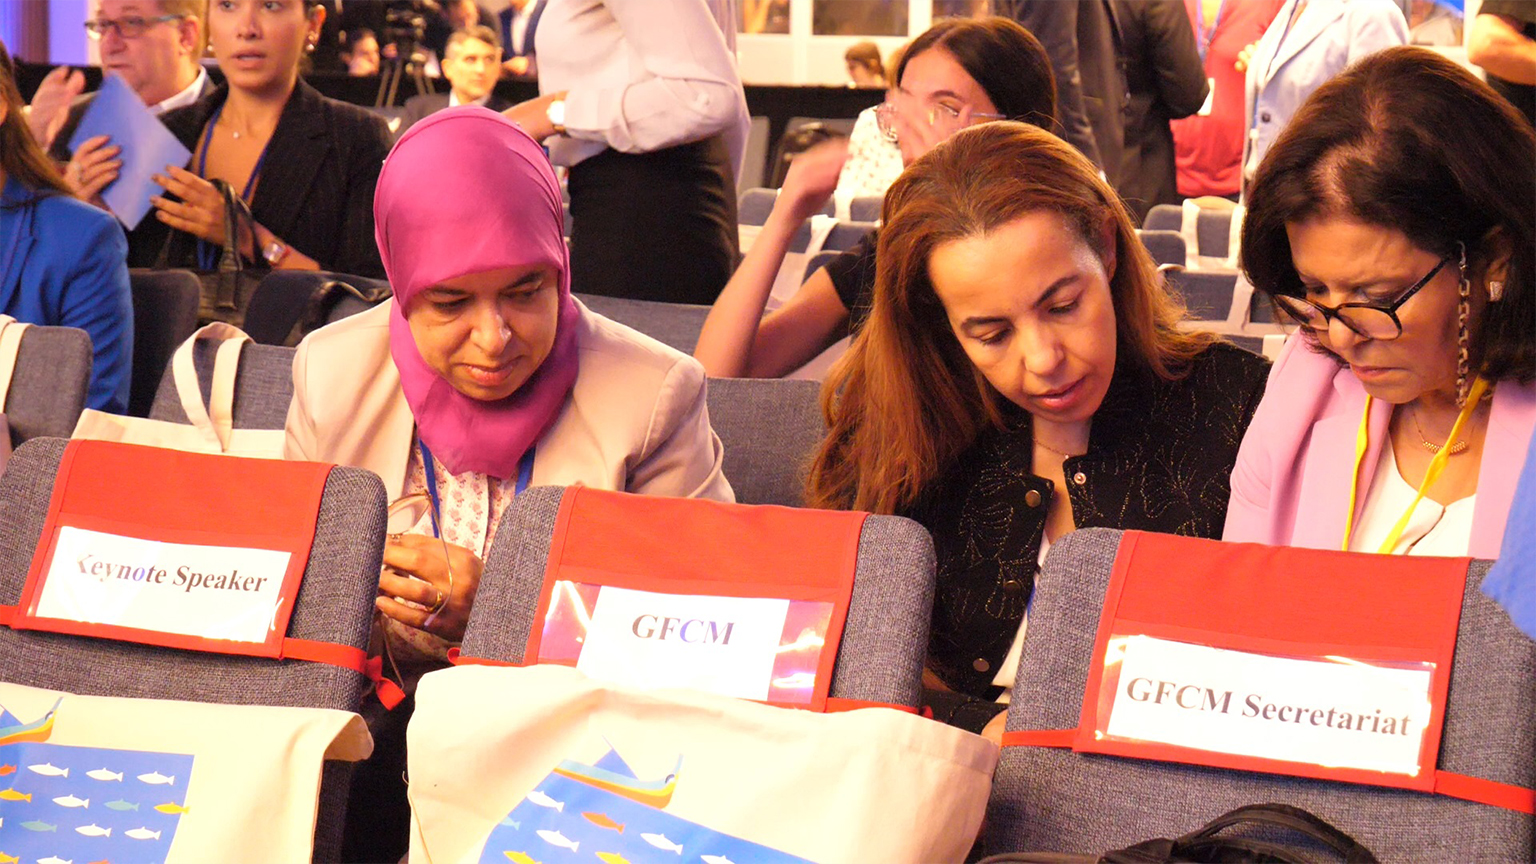 Attendees to the conference, including Zakia Driouich (left) from Morocco.